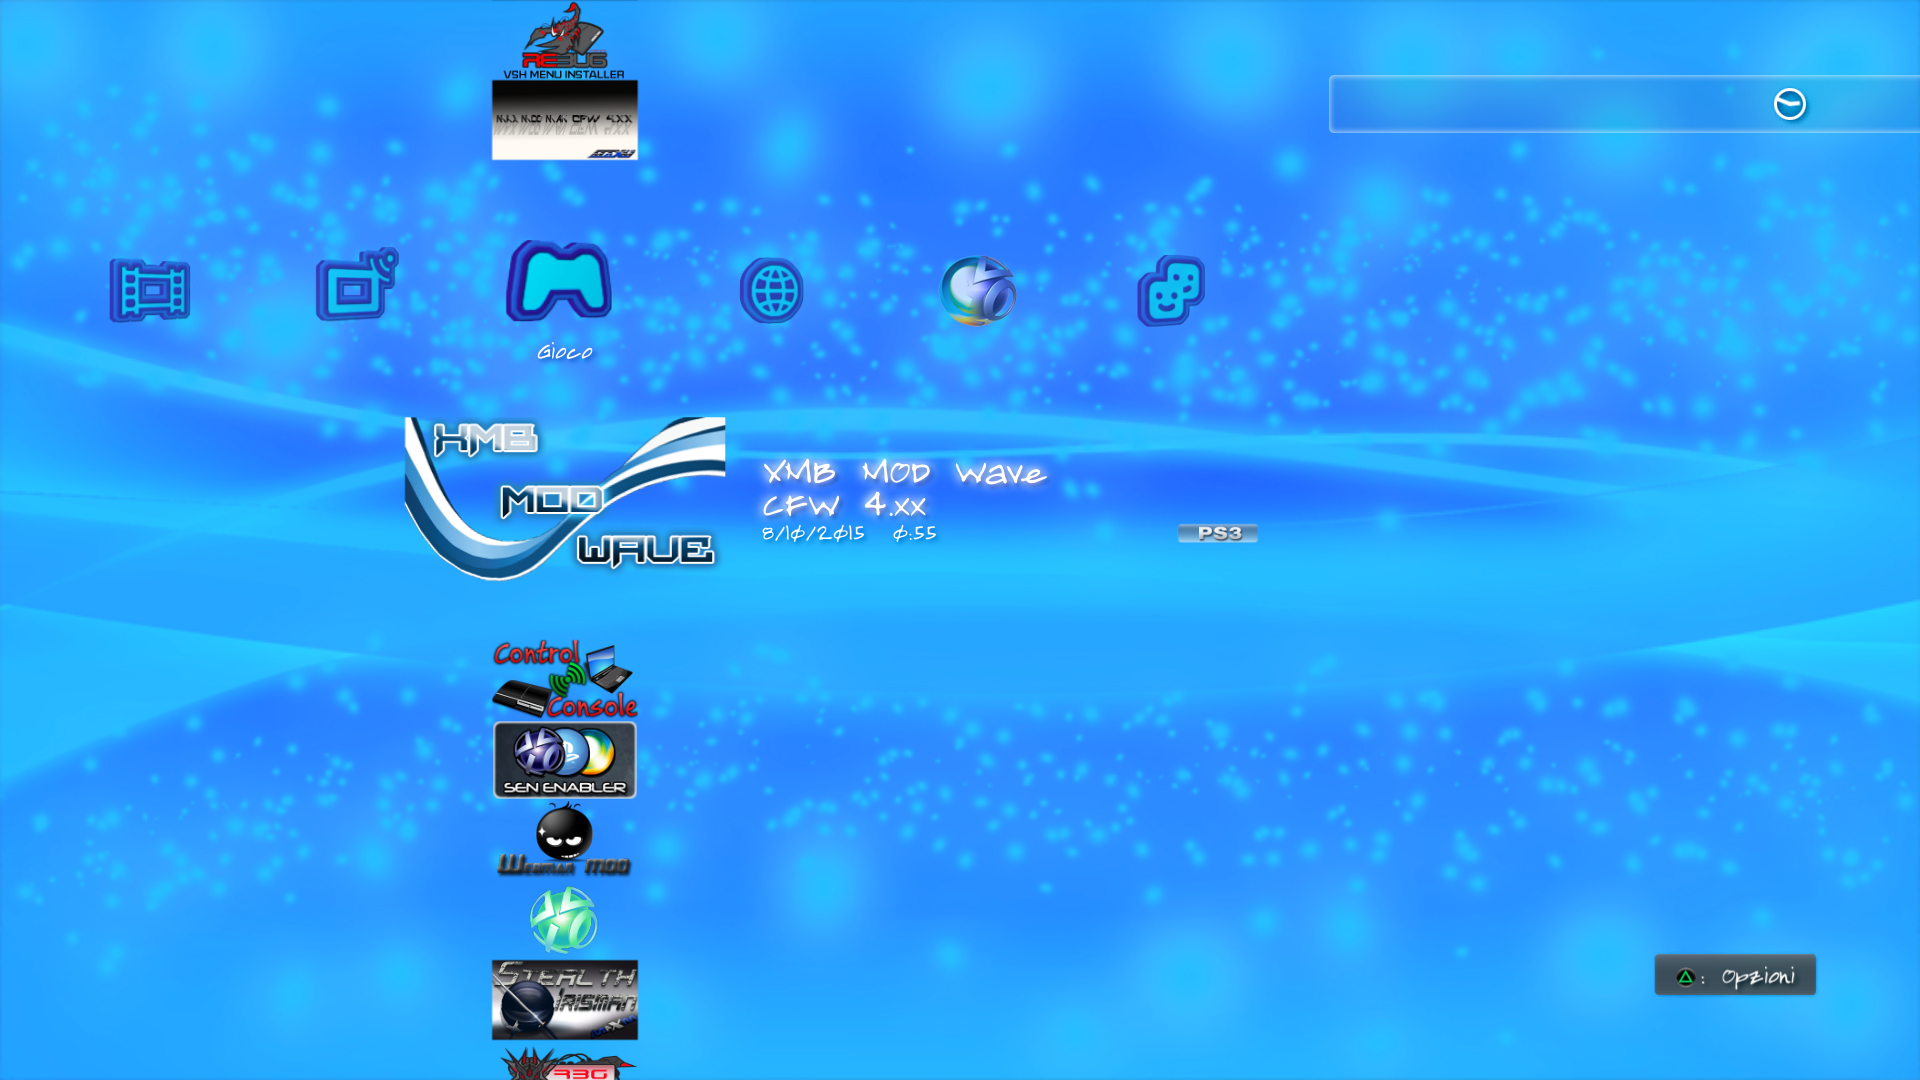 MaxModMan v2.5 by MiZiO90! Customize your PS3! | PS3Hax Network